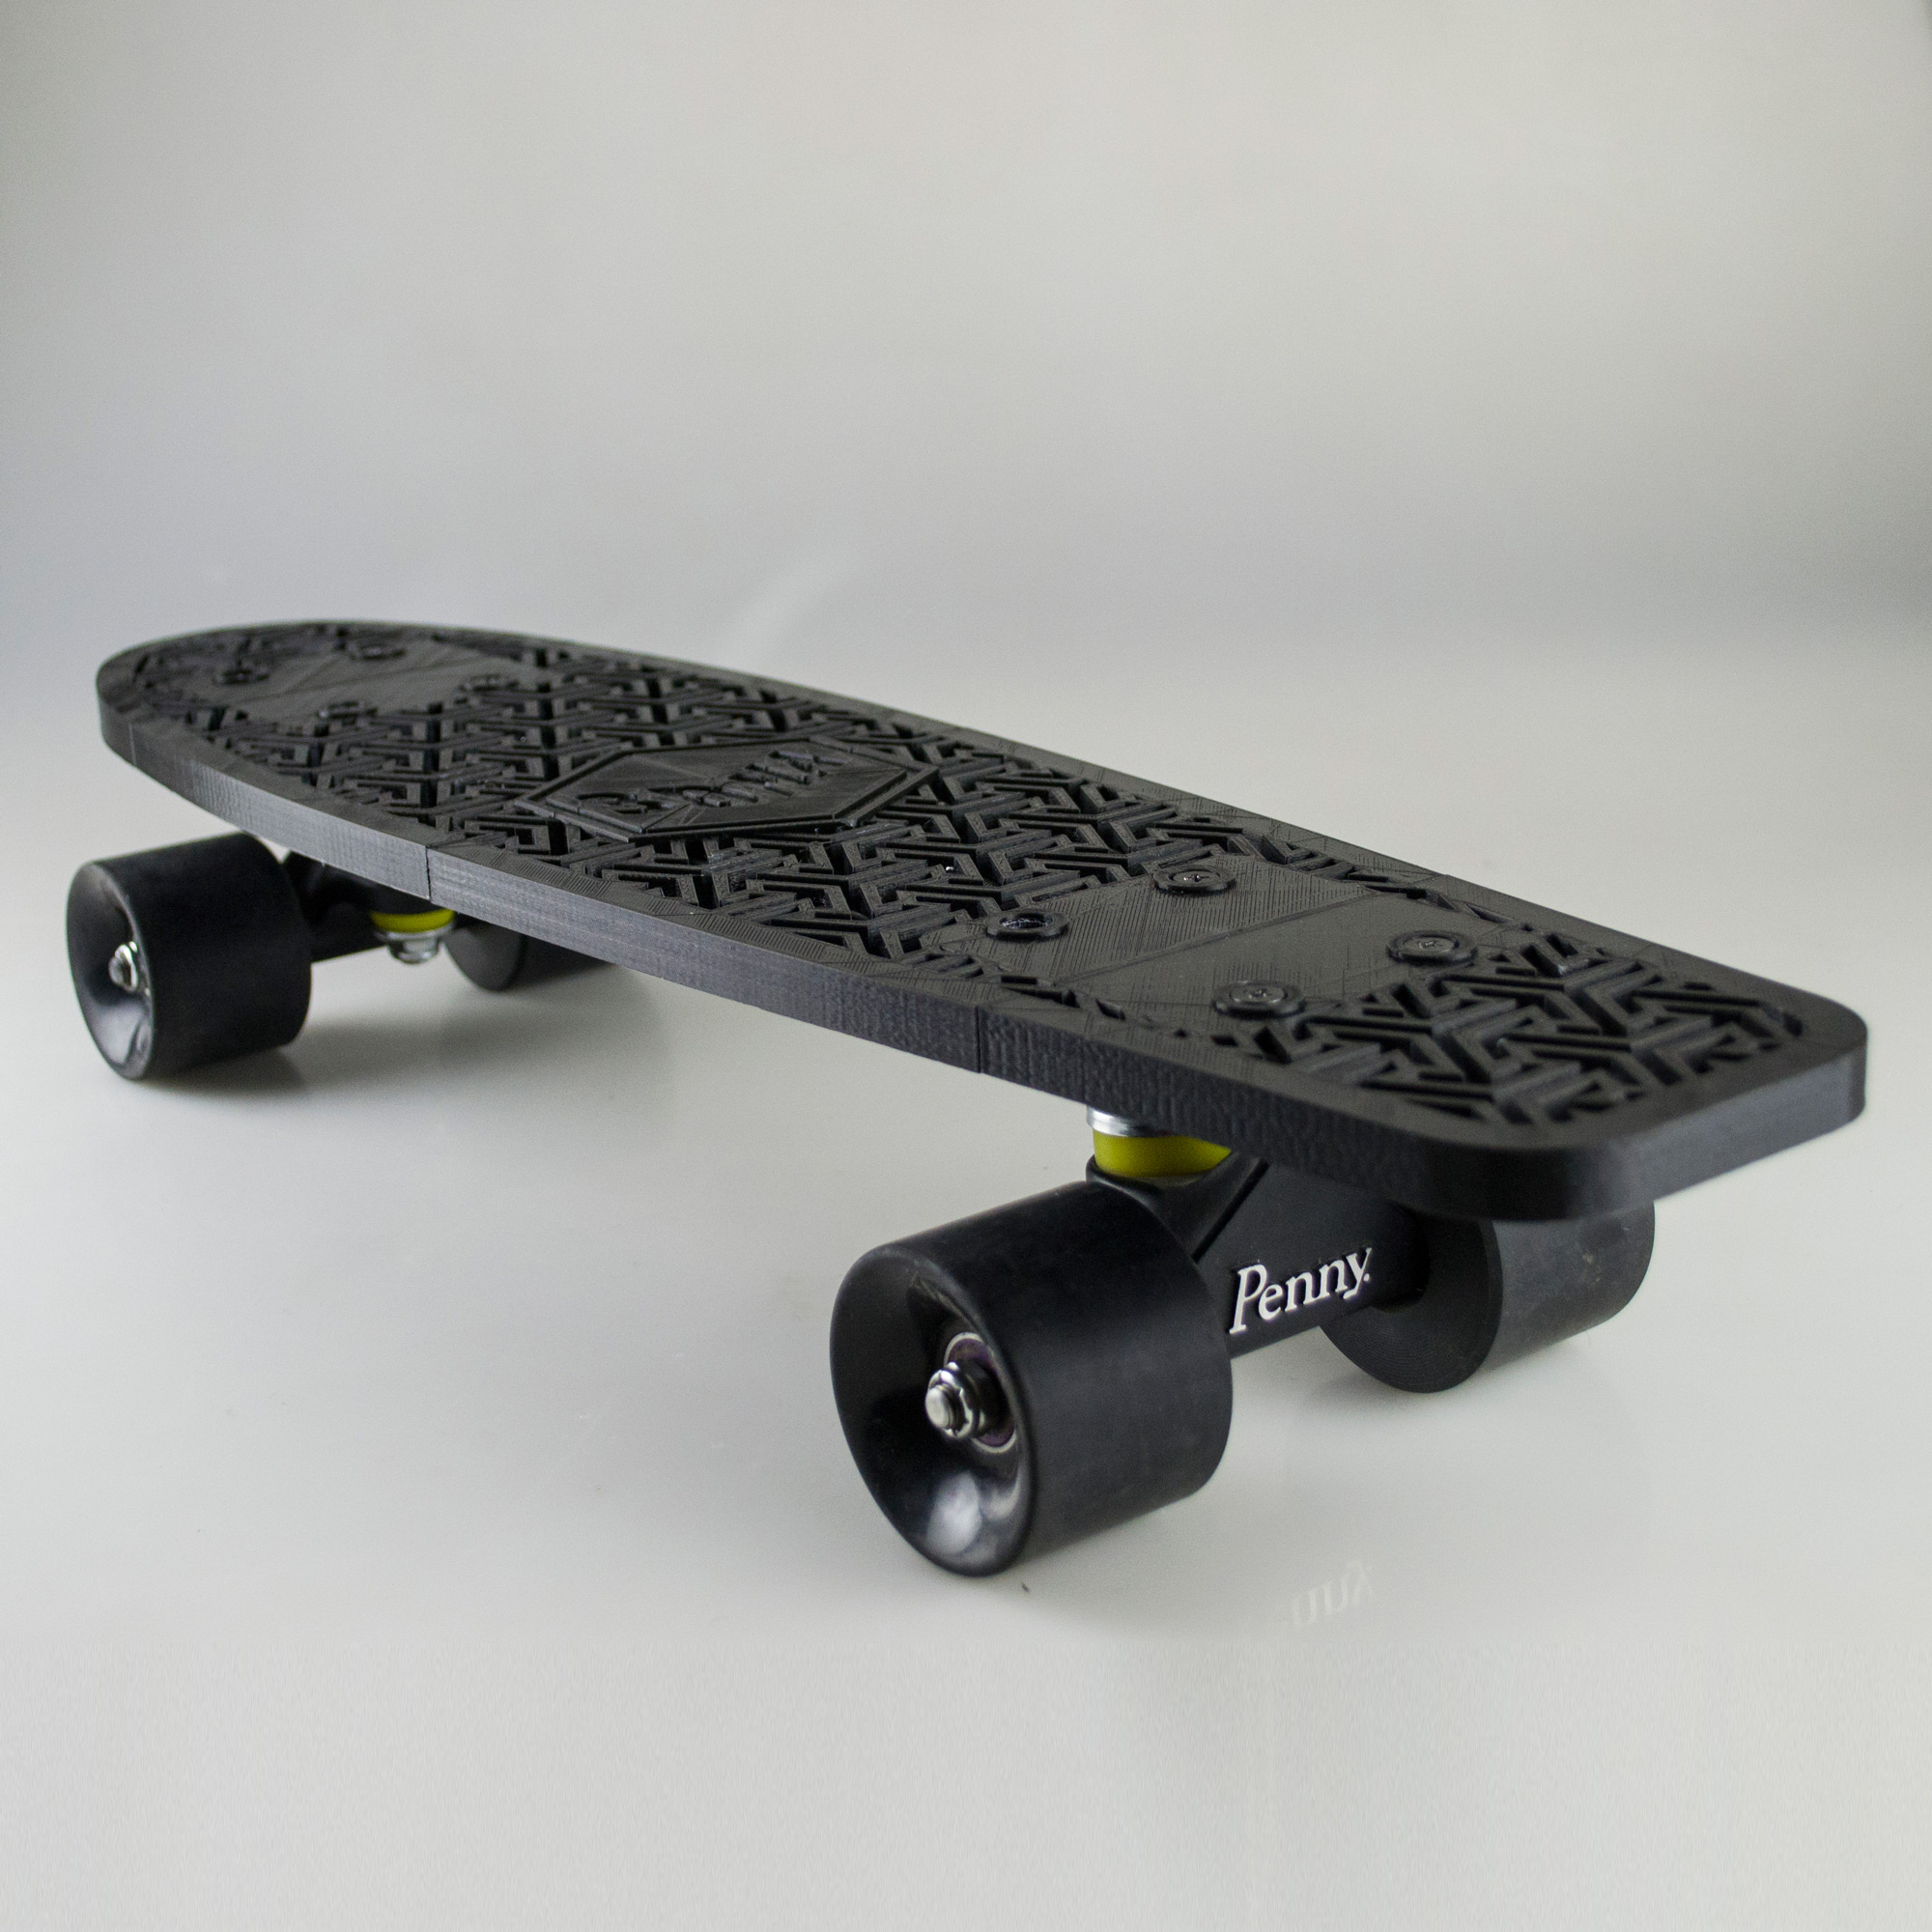 3DNA Penny Board